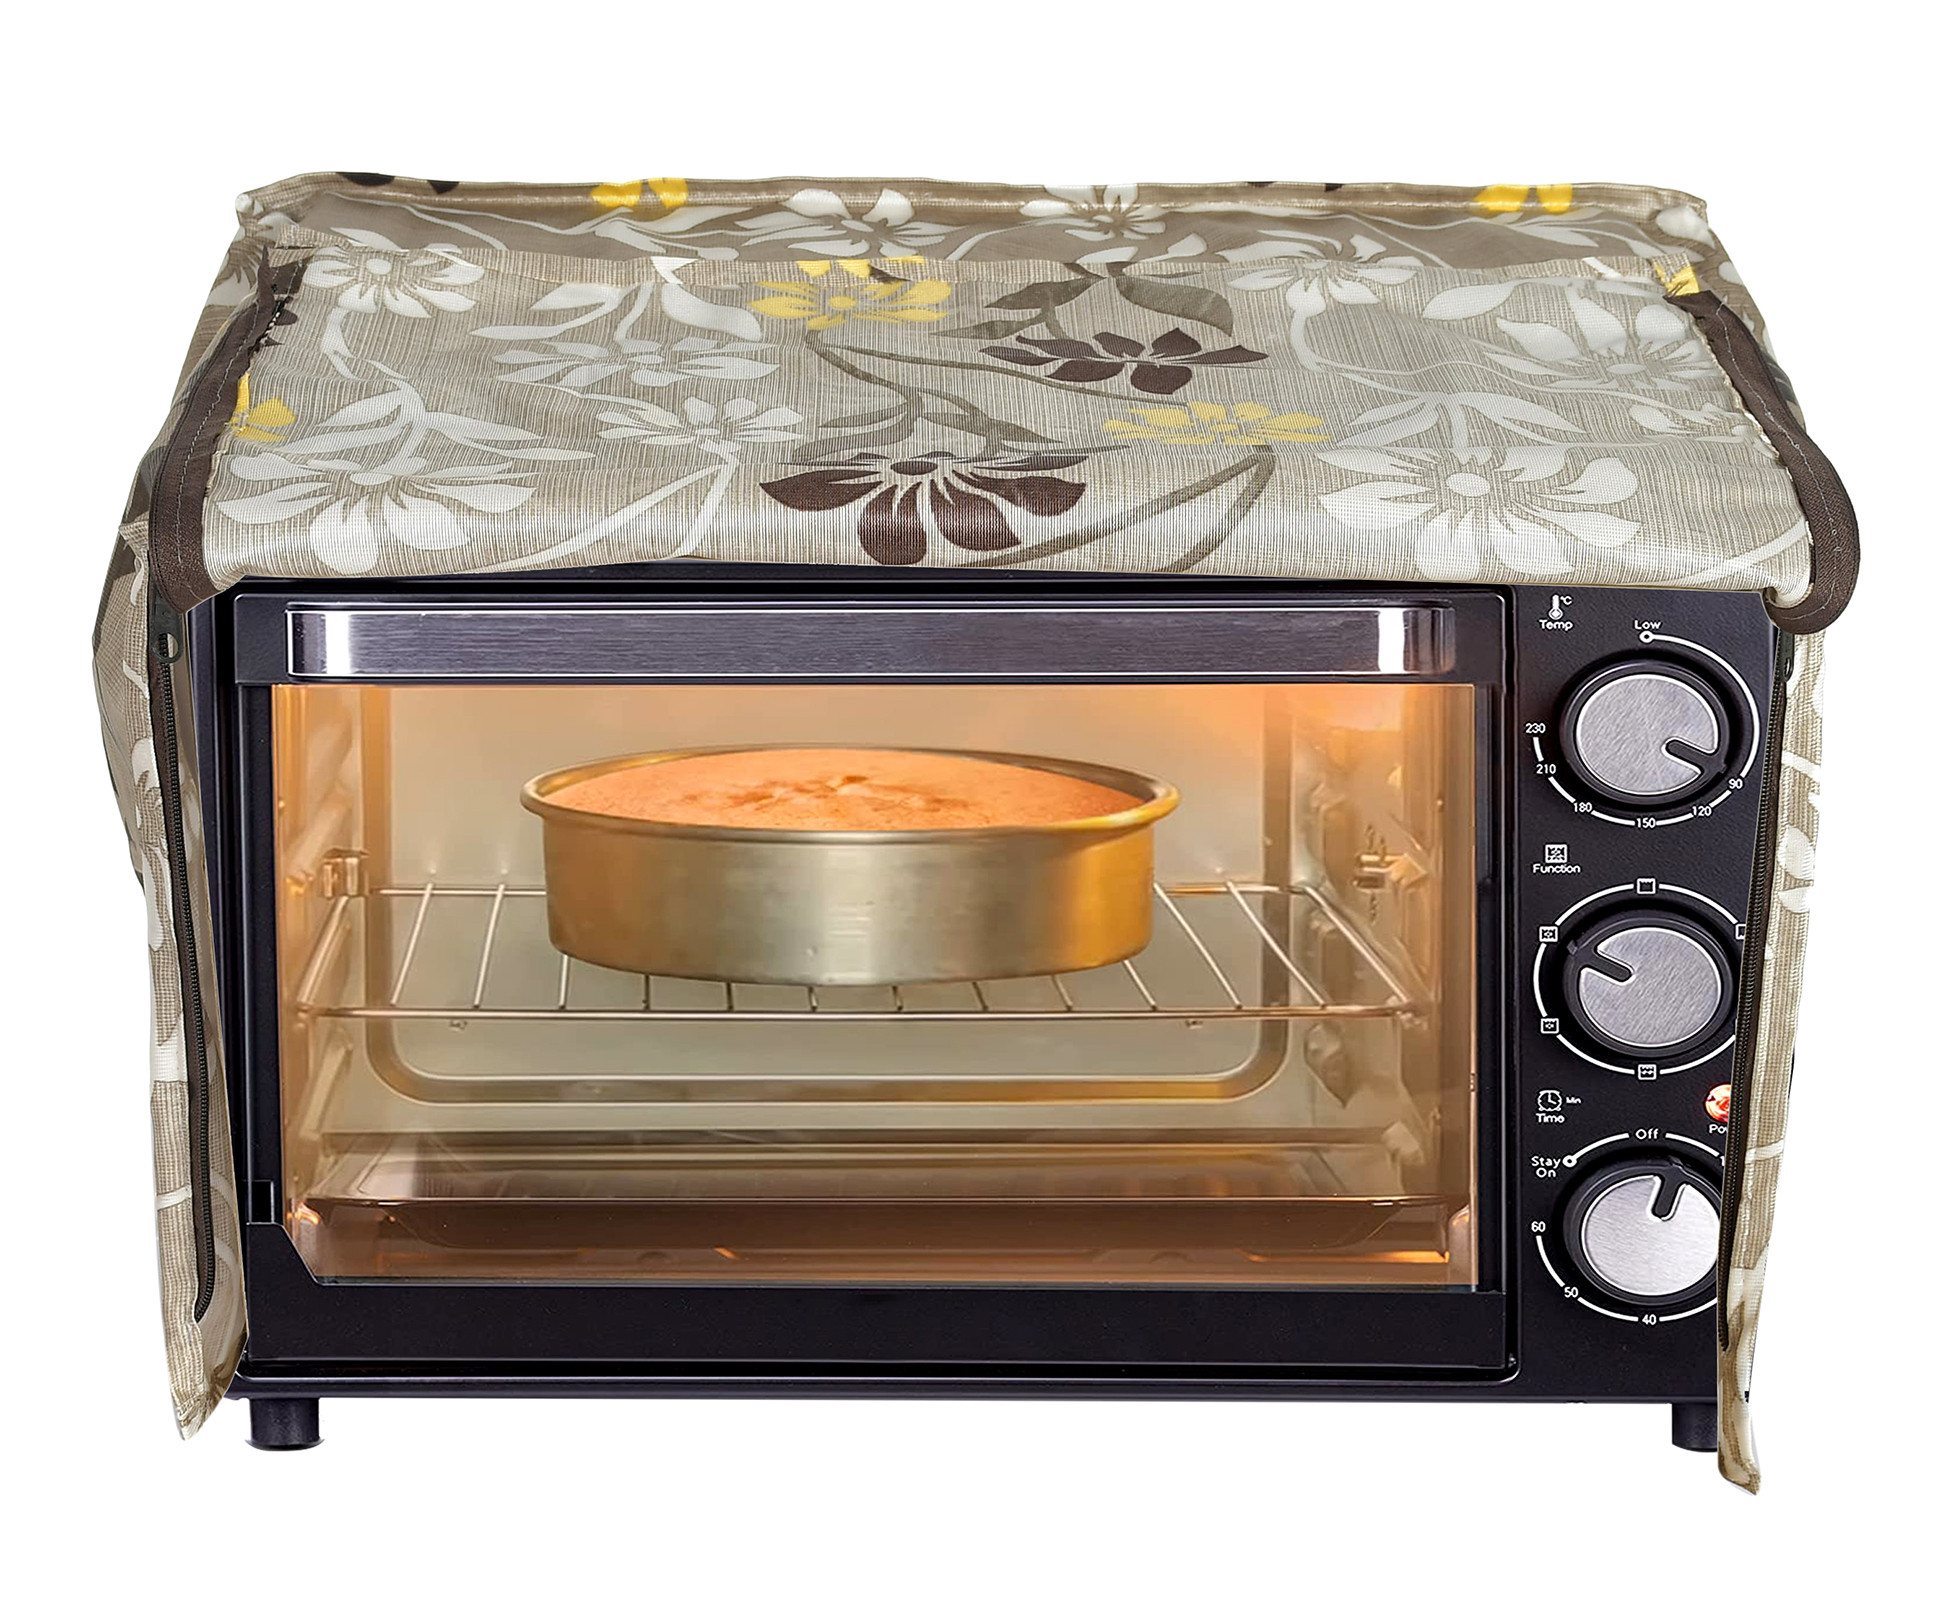 Kuber Industries Polyster Flower Printed Microwave Oven Cover,30 Ltr. (Brown)-HS43KUBMART25919